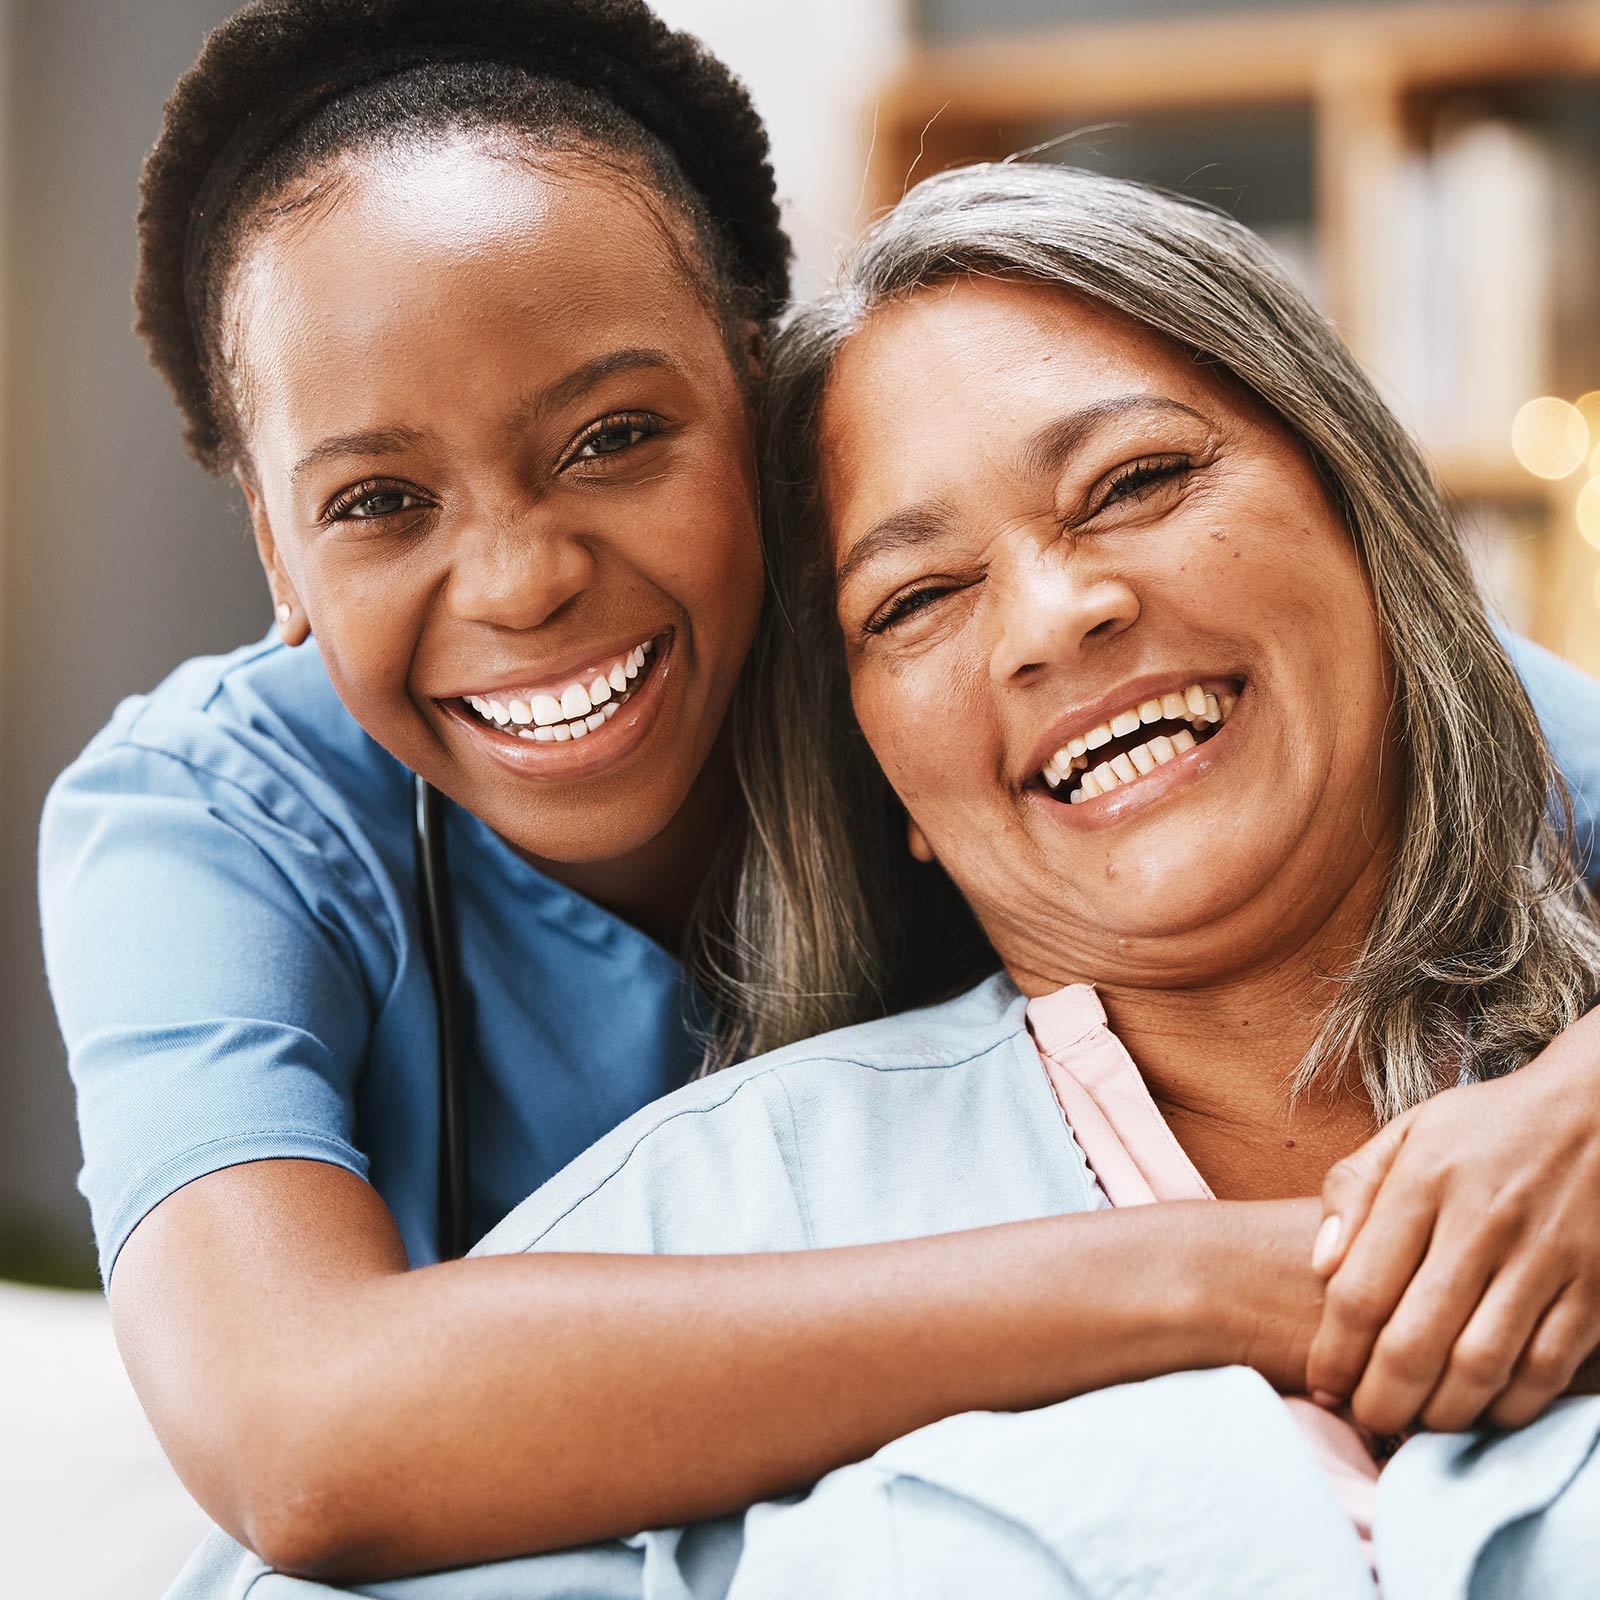 A caregiver smiling with an older woman.